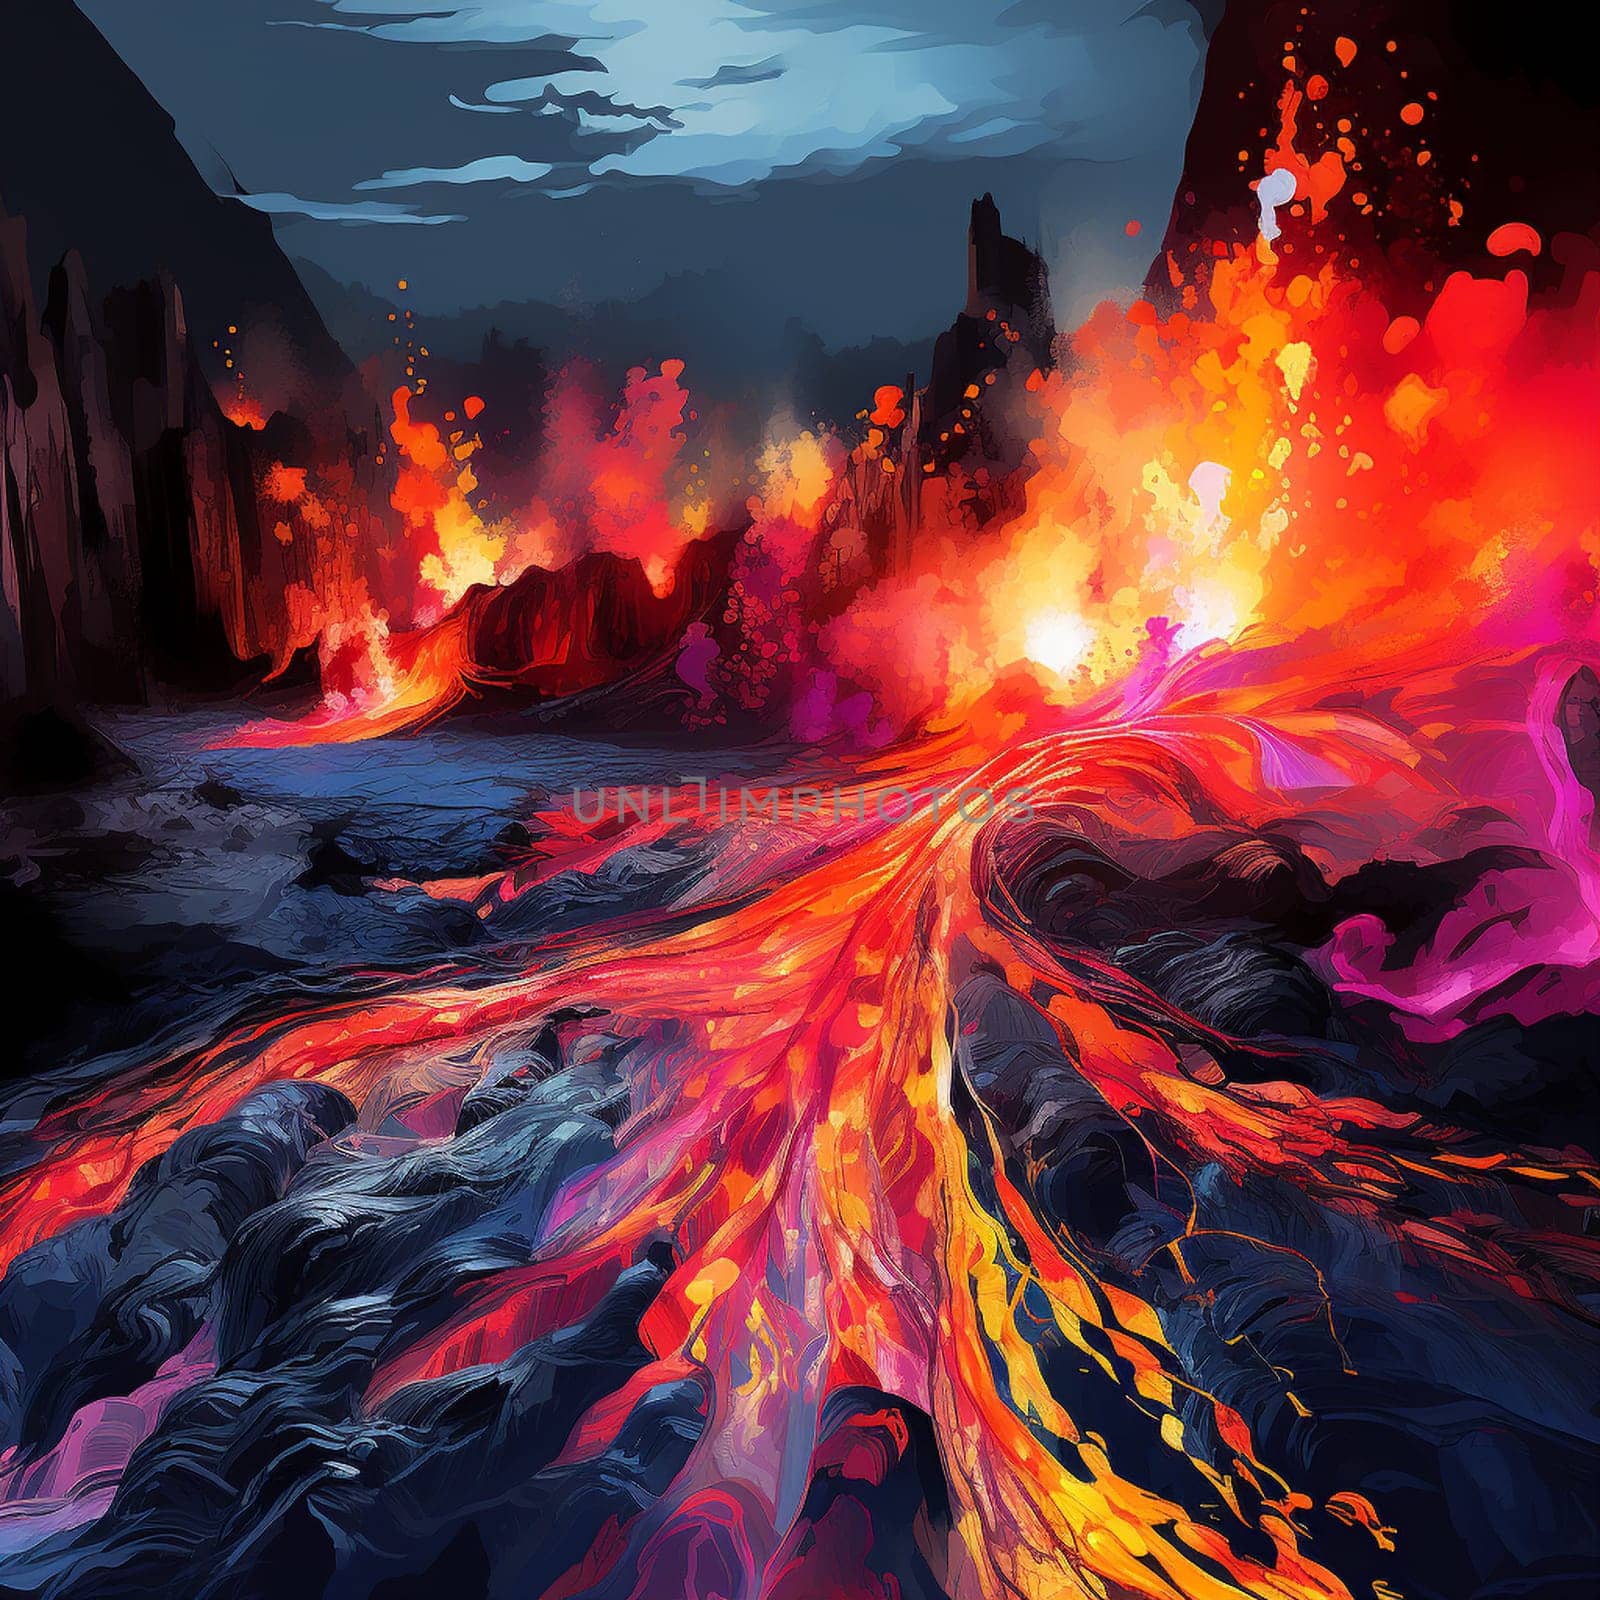 Experience the mesmerizing beauty and raw power of nature's fiery embrace in this surreal and abstract image of a volcanic eruption. Vibrant, swirling colors mingle with cascading lava streams, creating a captivating portrayal that evokes a sense of both awe and danger. The art style is reminiscent of Impressionism, with bold brushstrokes and a dreamlike quality that adds to the visual impact. There are no identifiable landmarks or trademarks, allowing the focus to solely remain on the stunning portrayal of this unique volcanic phenomenon.